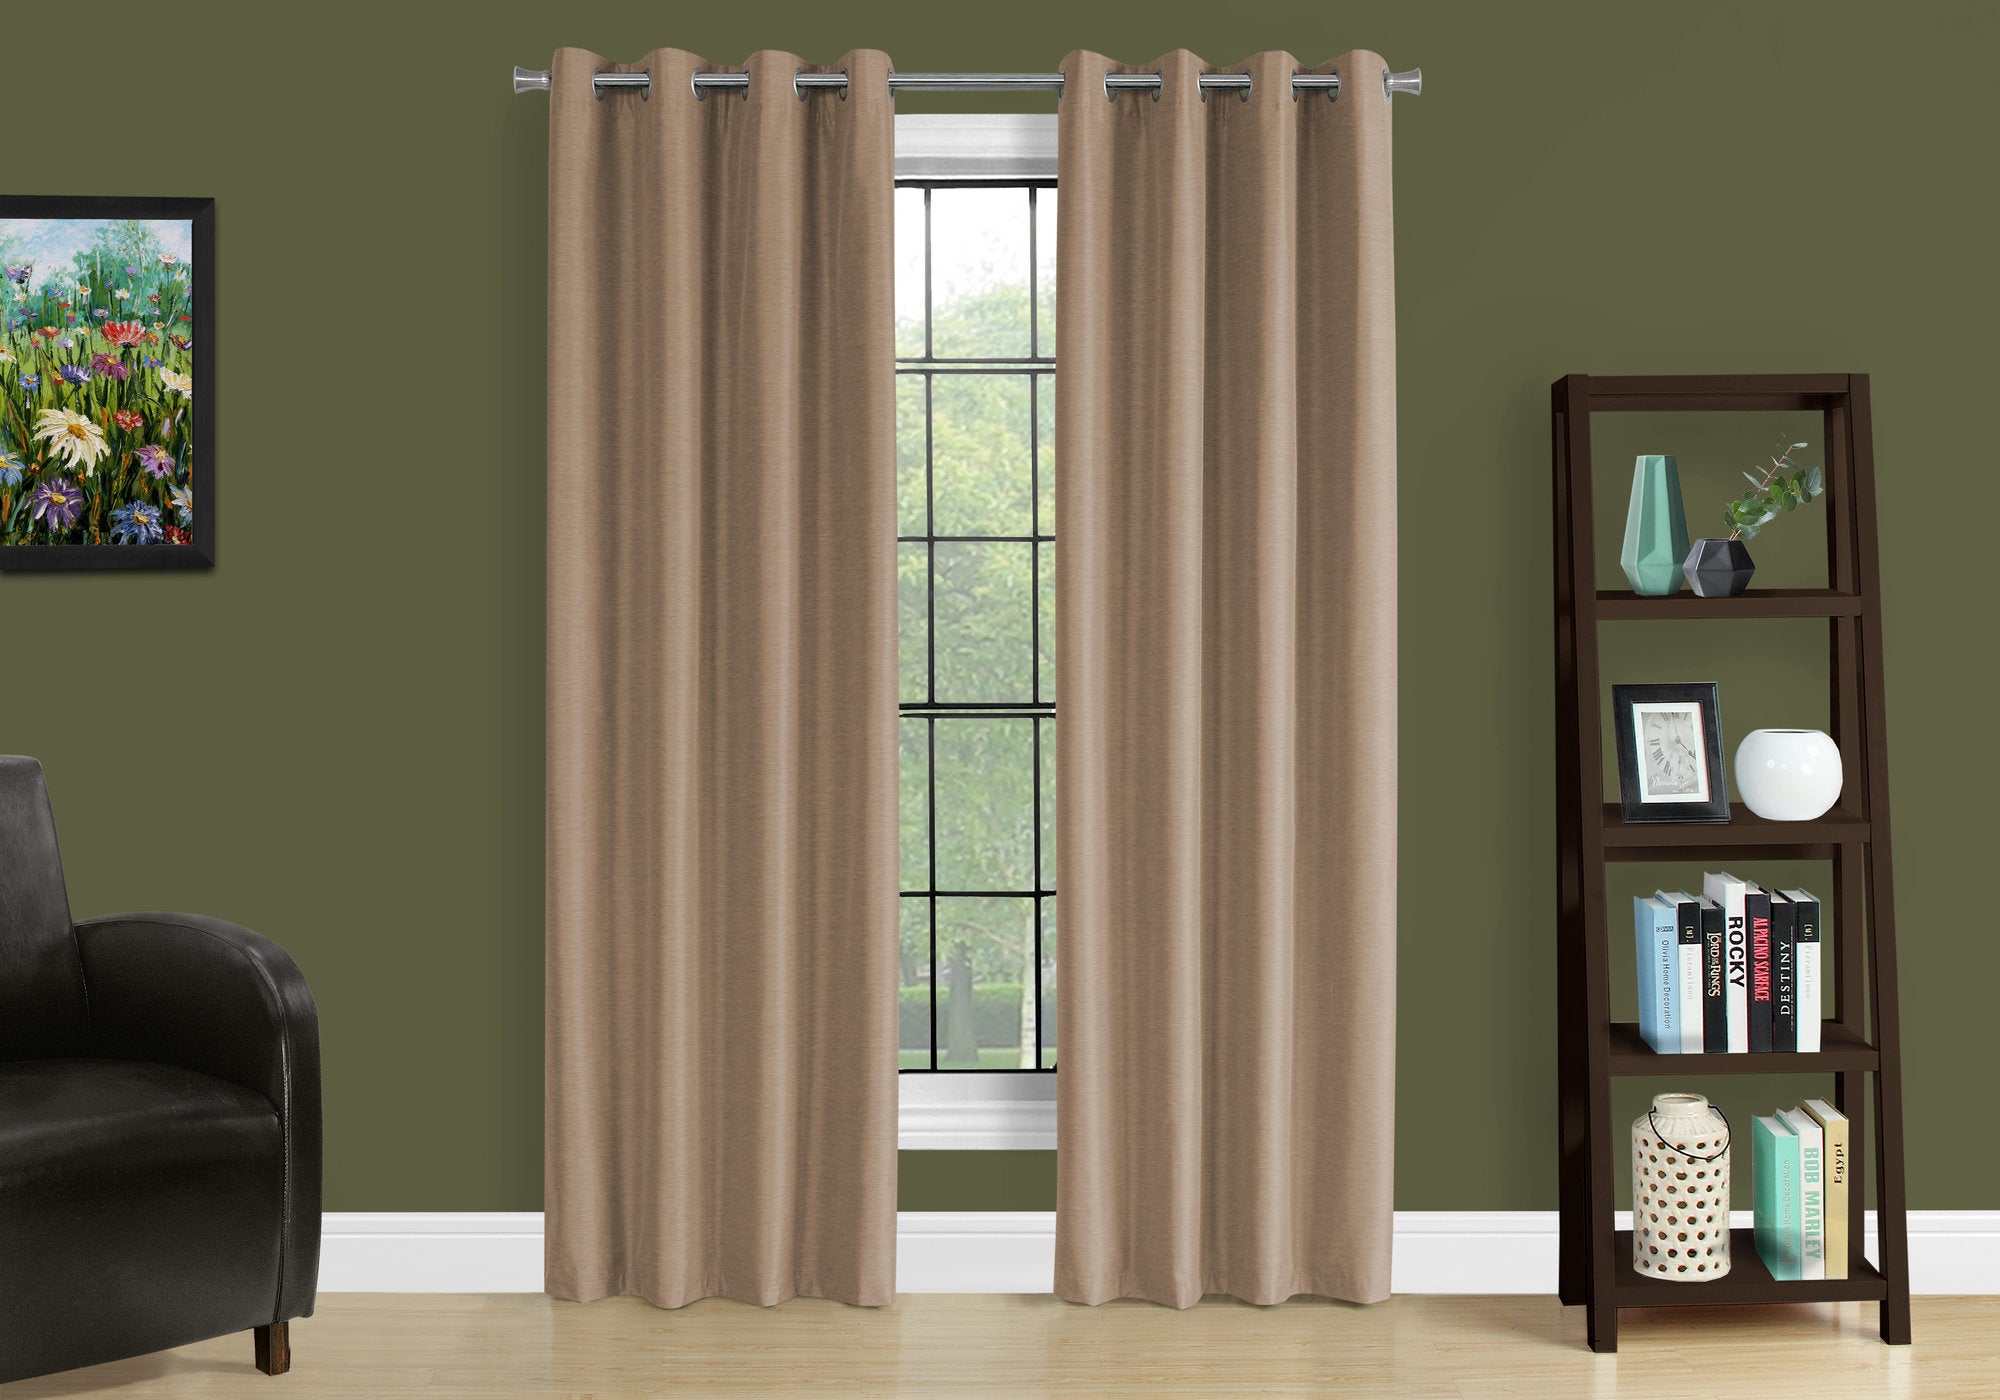 MN-839839    Curtain Panel, 2Pcs Set, 54"W X 95"L, 100% Blackout, Grommet, Living Room, Bedroom, Kitchen, Thermal Insulation Fabric, Polyester Full Light Blocking Fabric, Brown, Contemporary, Modern